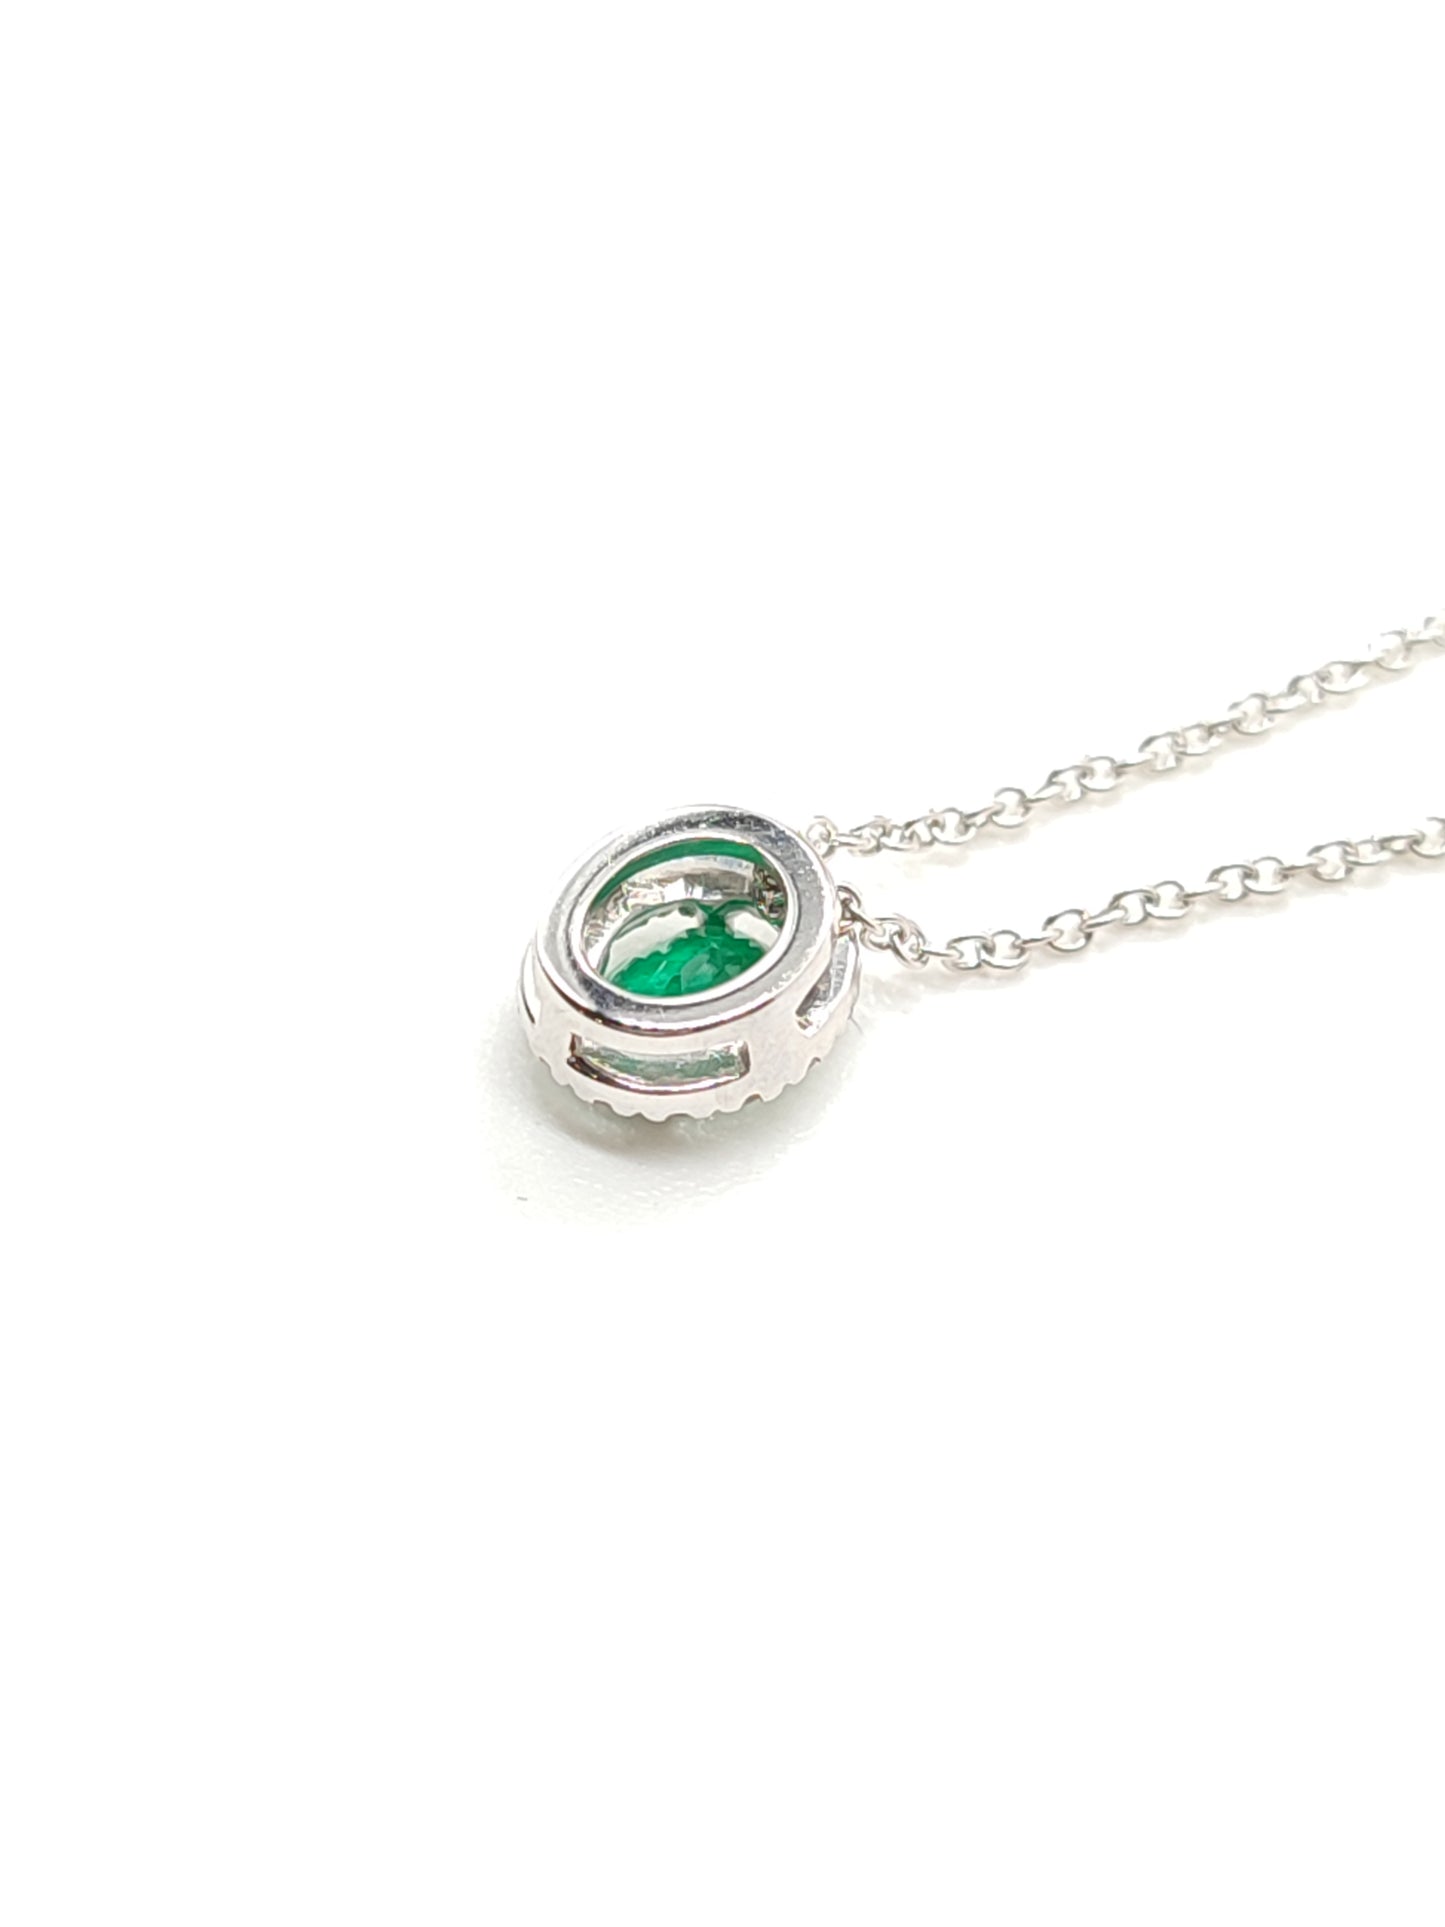 White gold necklace with emerald